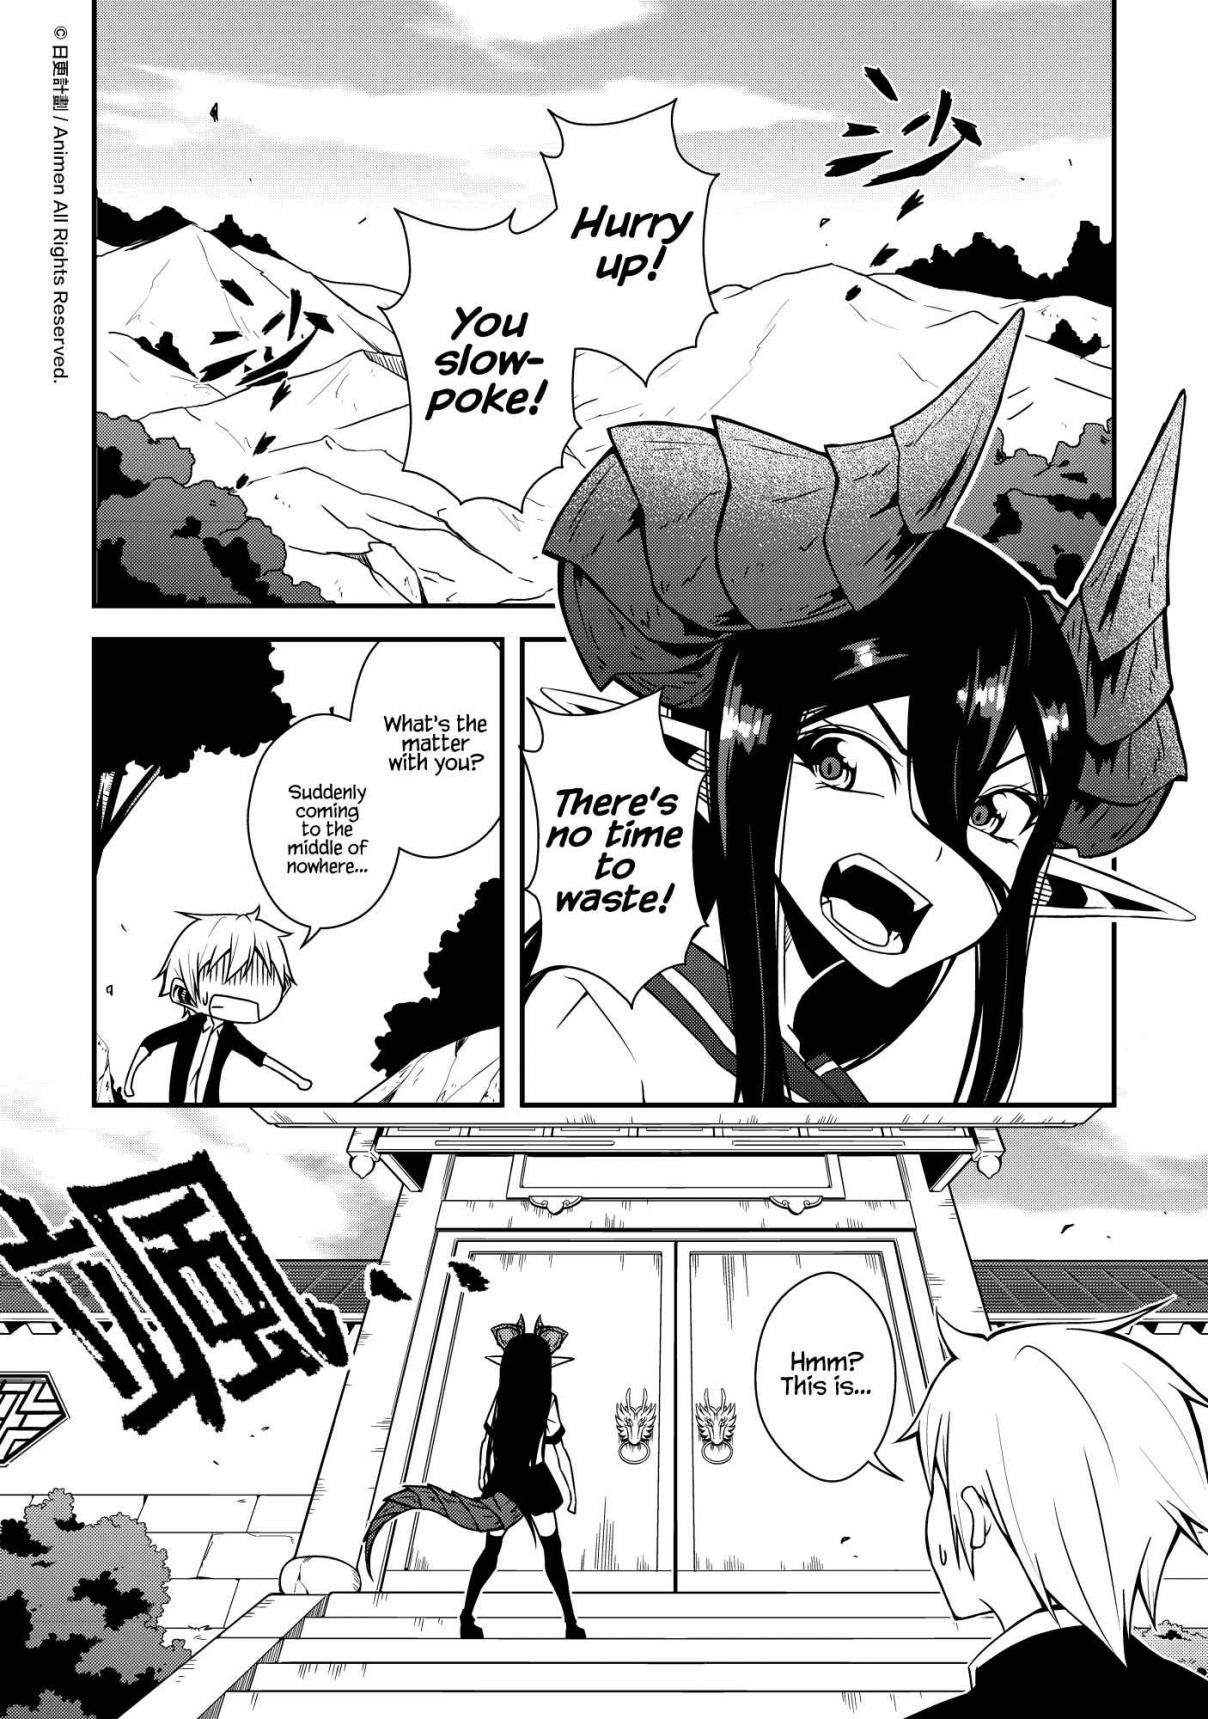 The Girl With Horns Vol. 1 Ch. 7 Divine Will